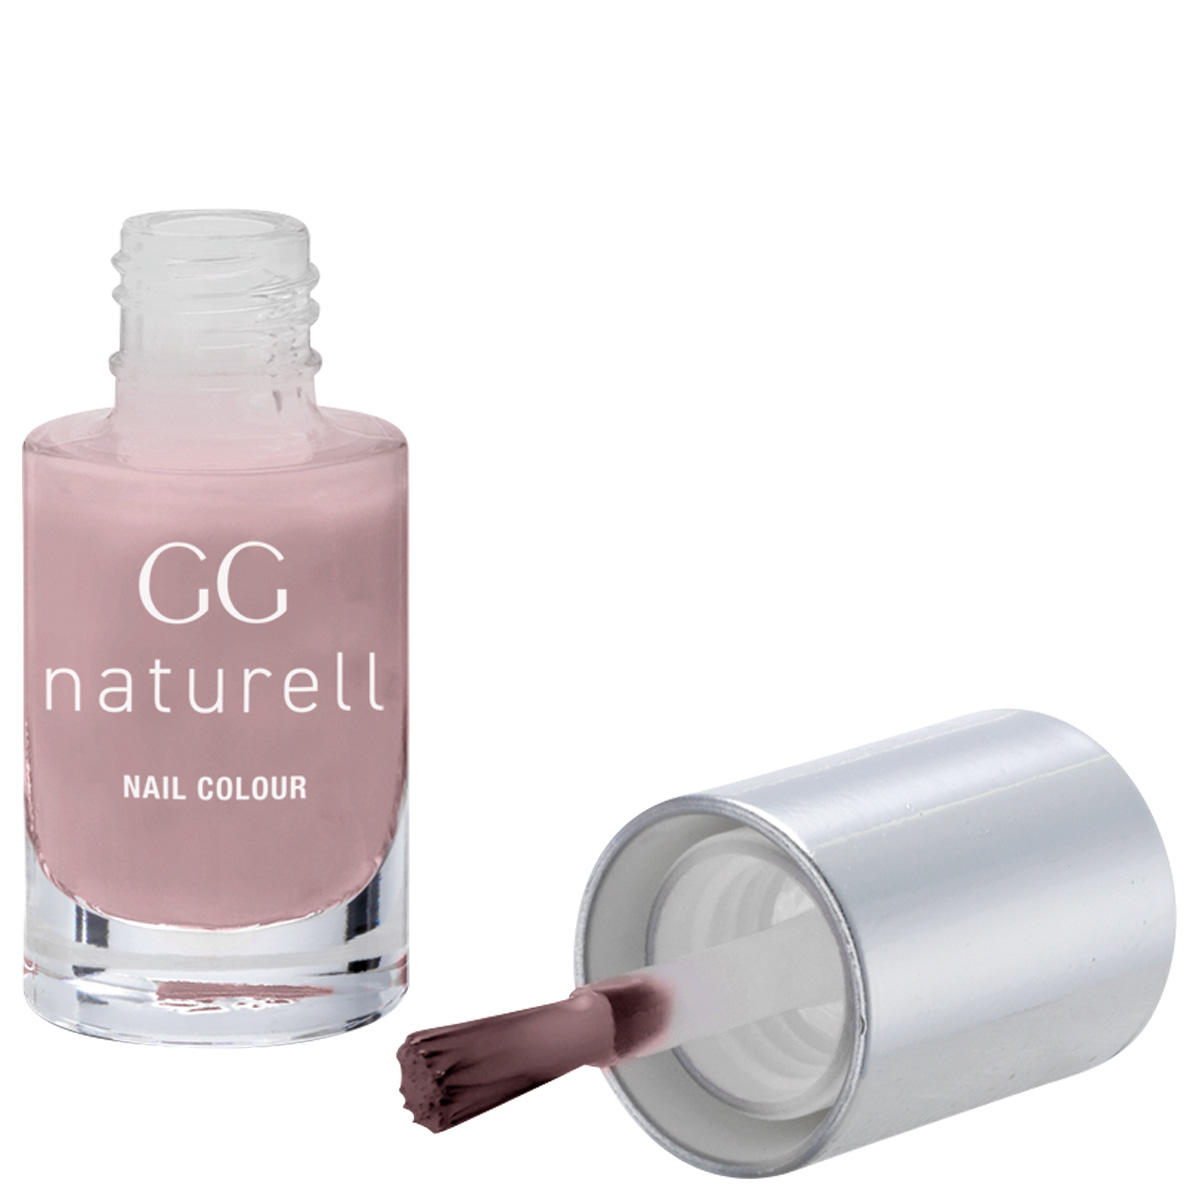 GERTRAUD GRUBER GG naturell Nail Colour 30 Orchidee 5 ml